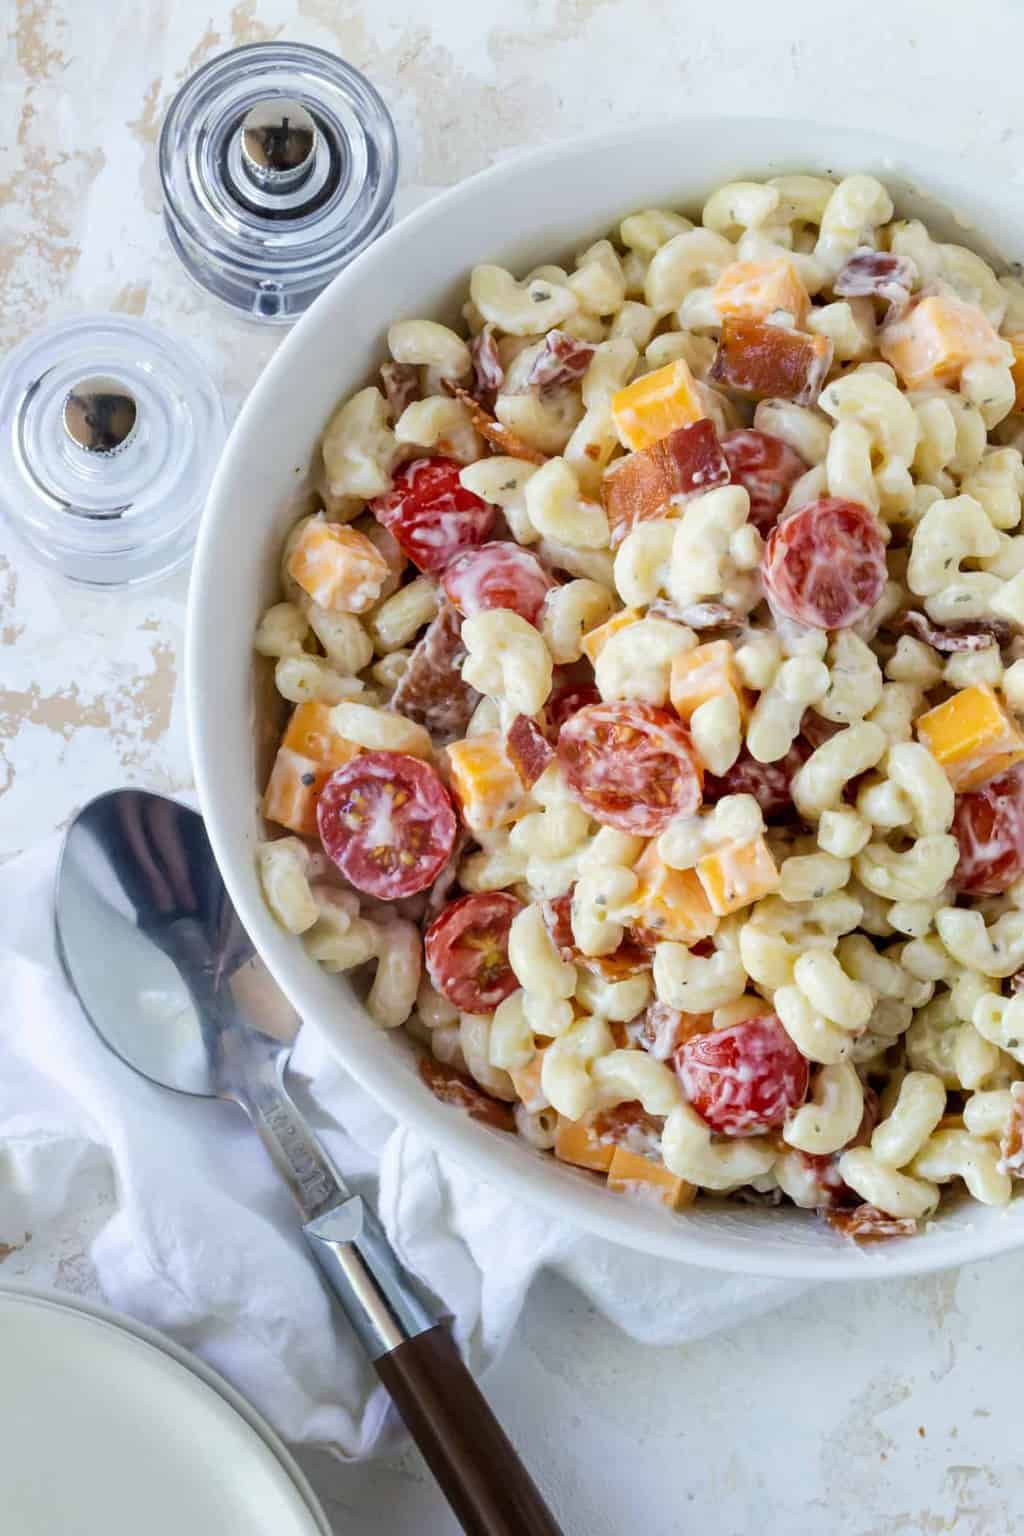 bacon ranch pasta salad in a white bowl on a white surface with a spoon for serving.